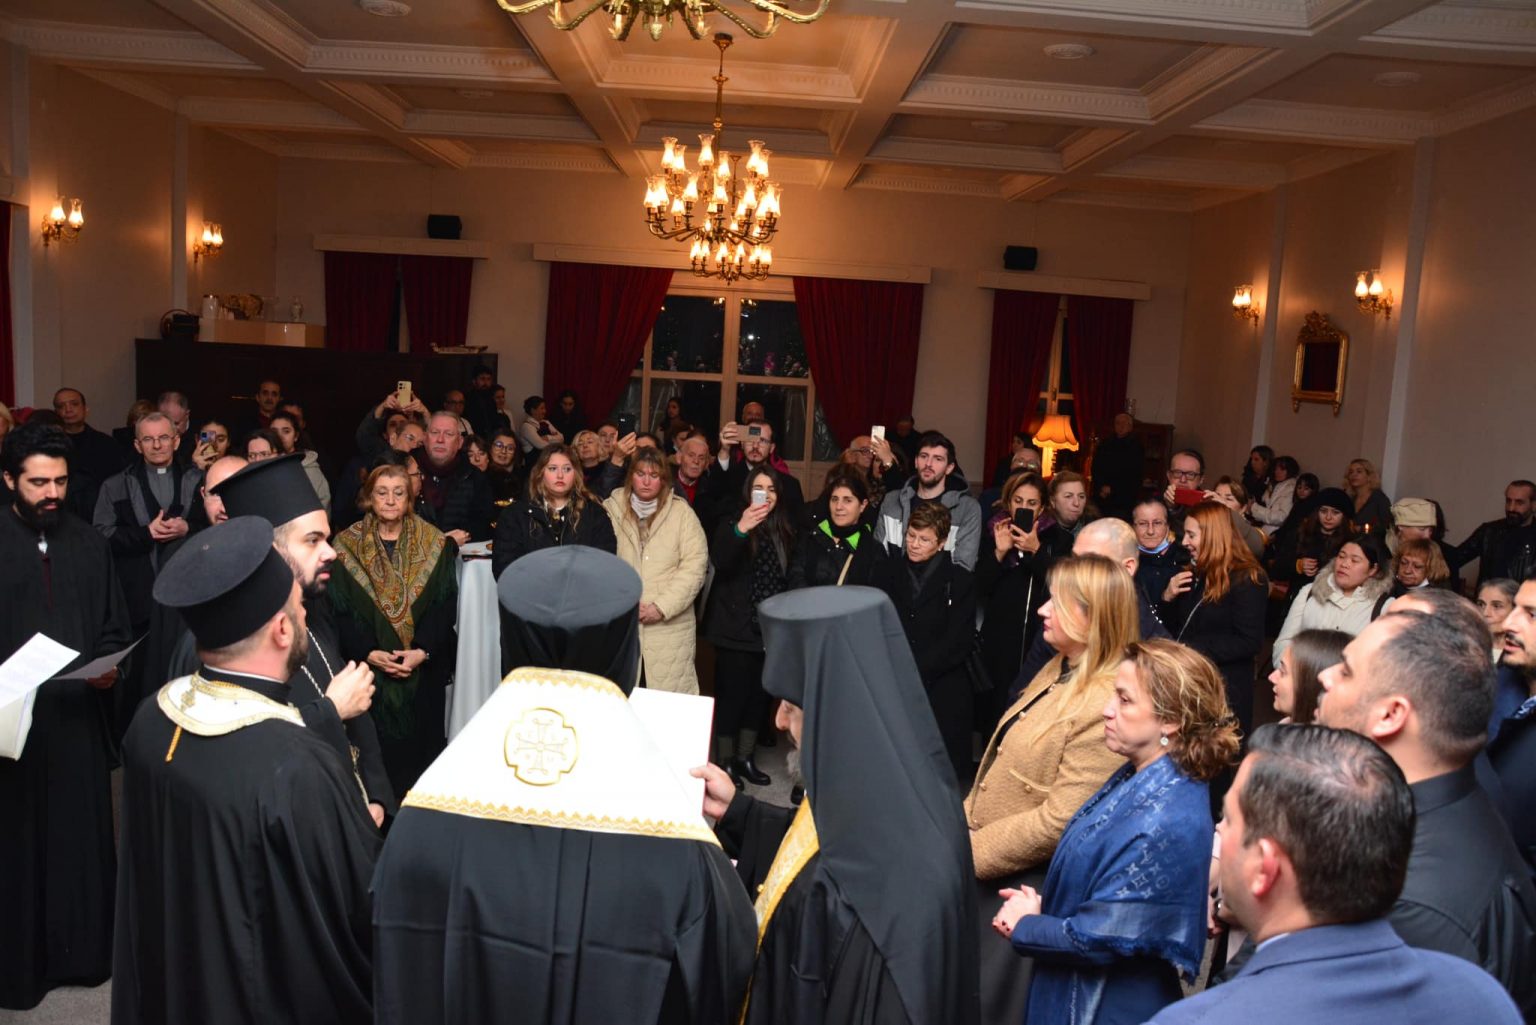 Great Vespers, Ecumenical Prayer Service and cutting of the Vasilopita at the Mega Revma Community in Constantinople